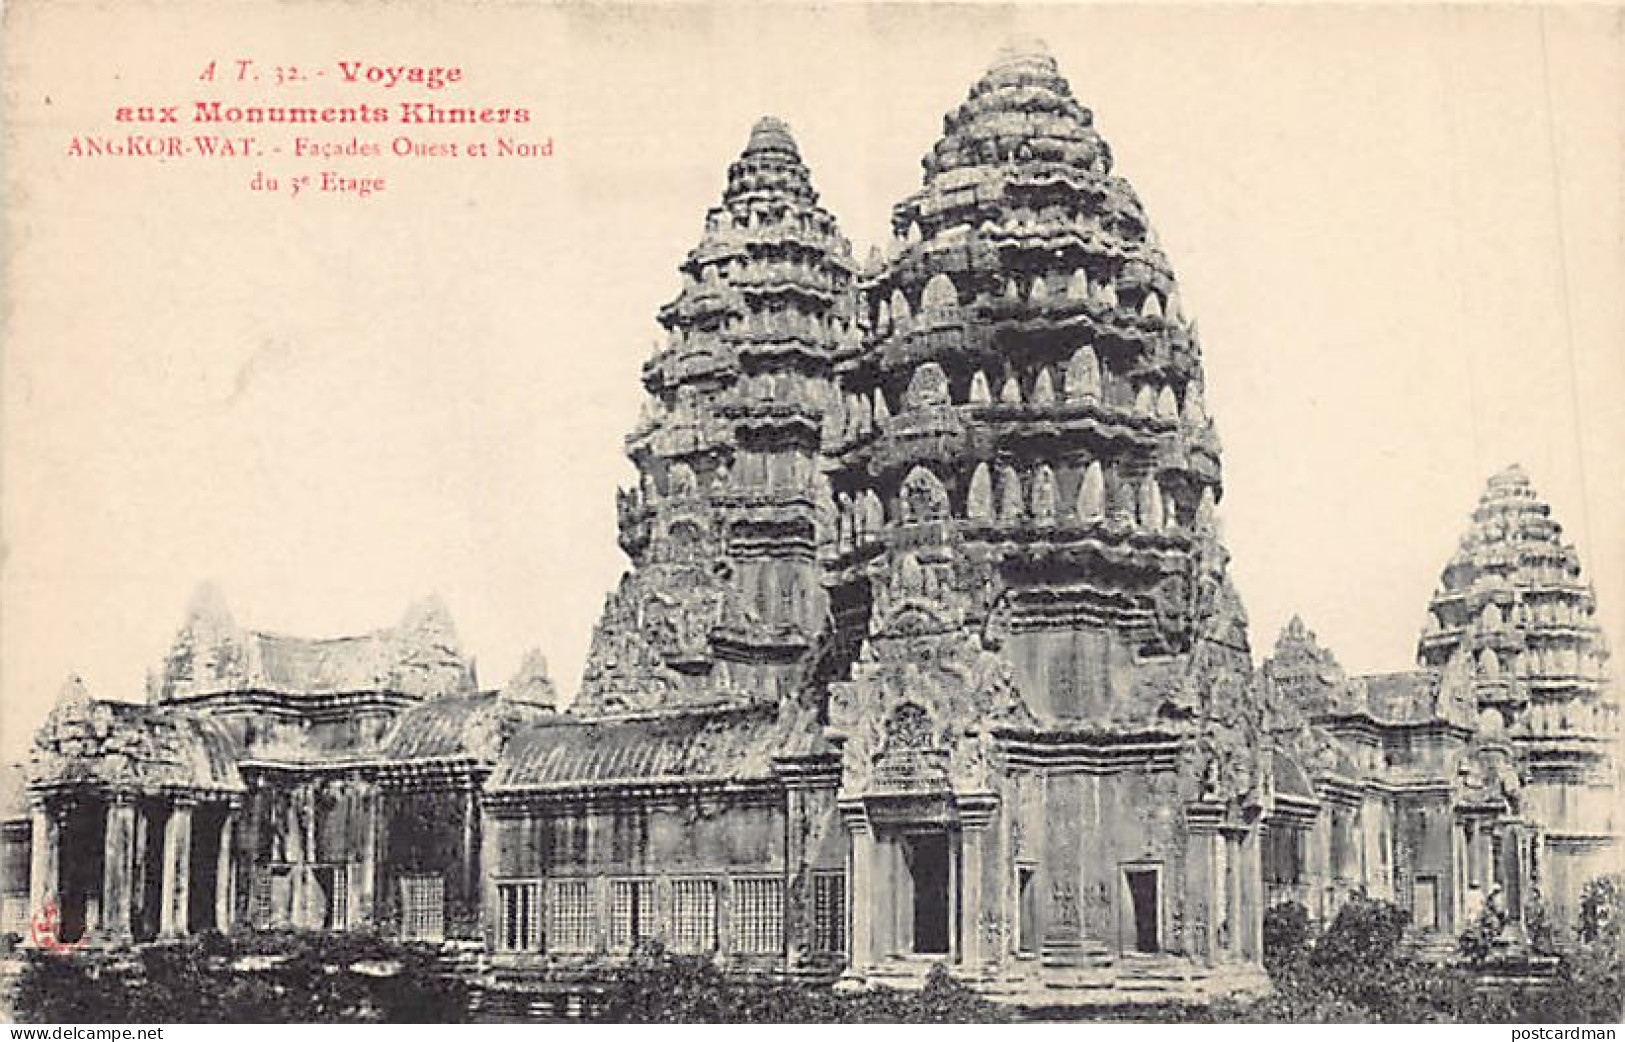 Cambodge - Voyage Aux Monuments Khmers - ANGKOR VAT - Façades Ouest Et Nord - Ed. A. T. 32 - Cambodge